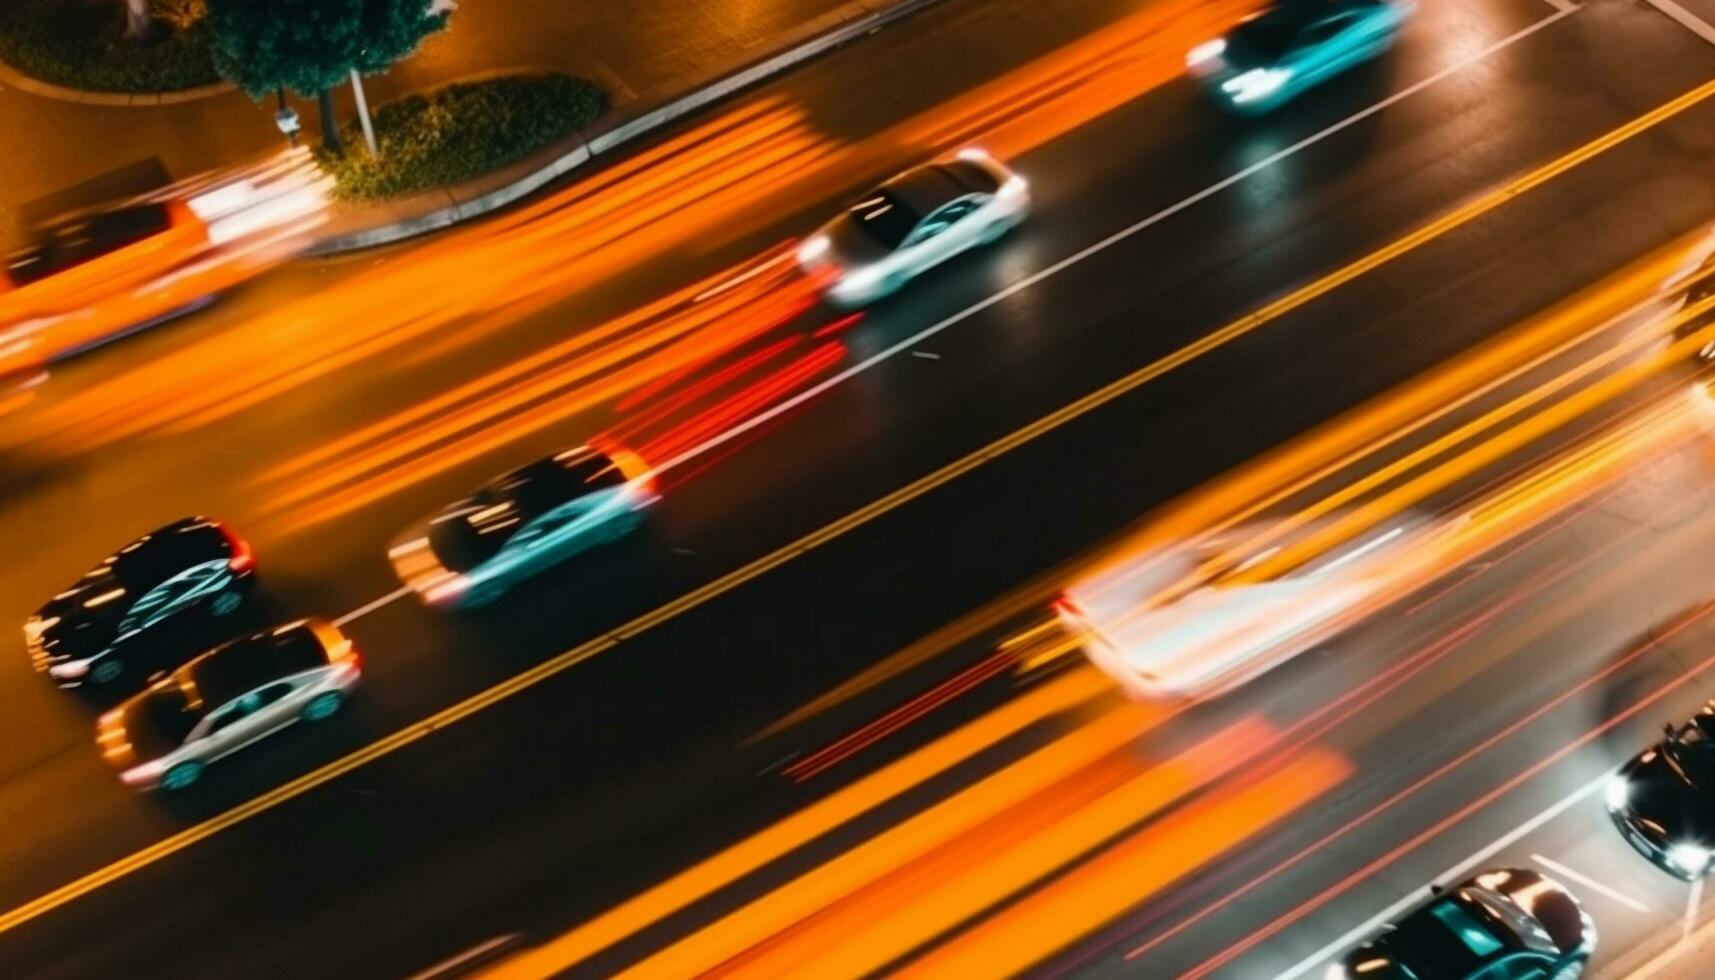 Nighttime traffic rush ignites city streets with blurred light trails generated by AI photo